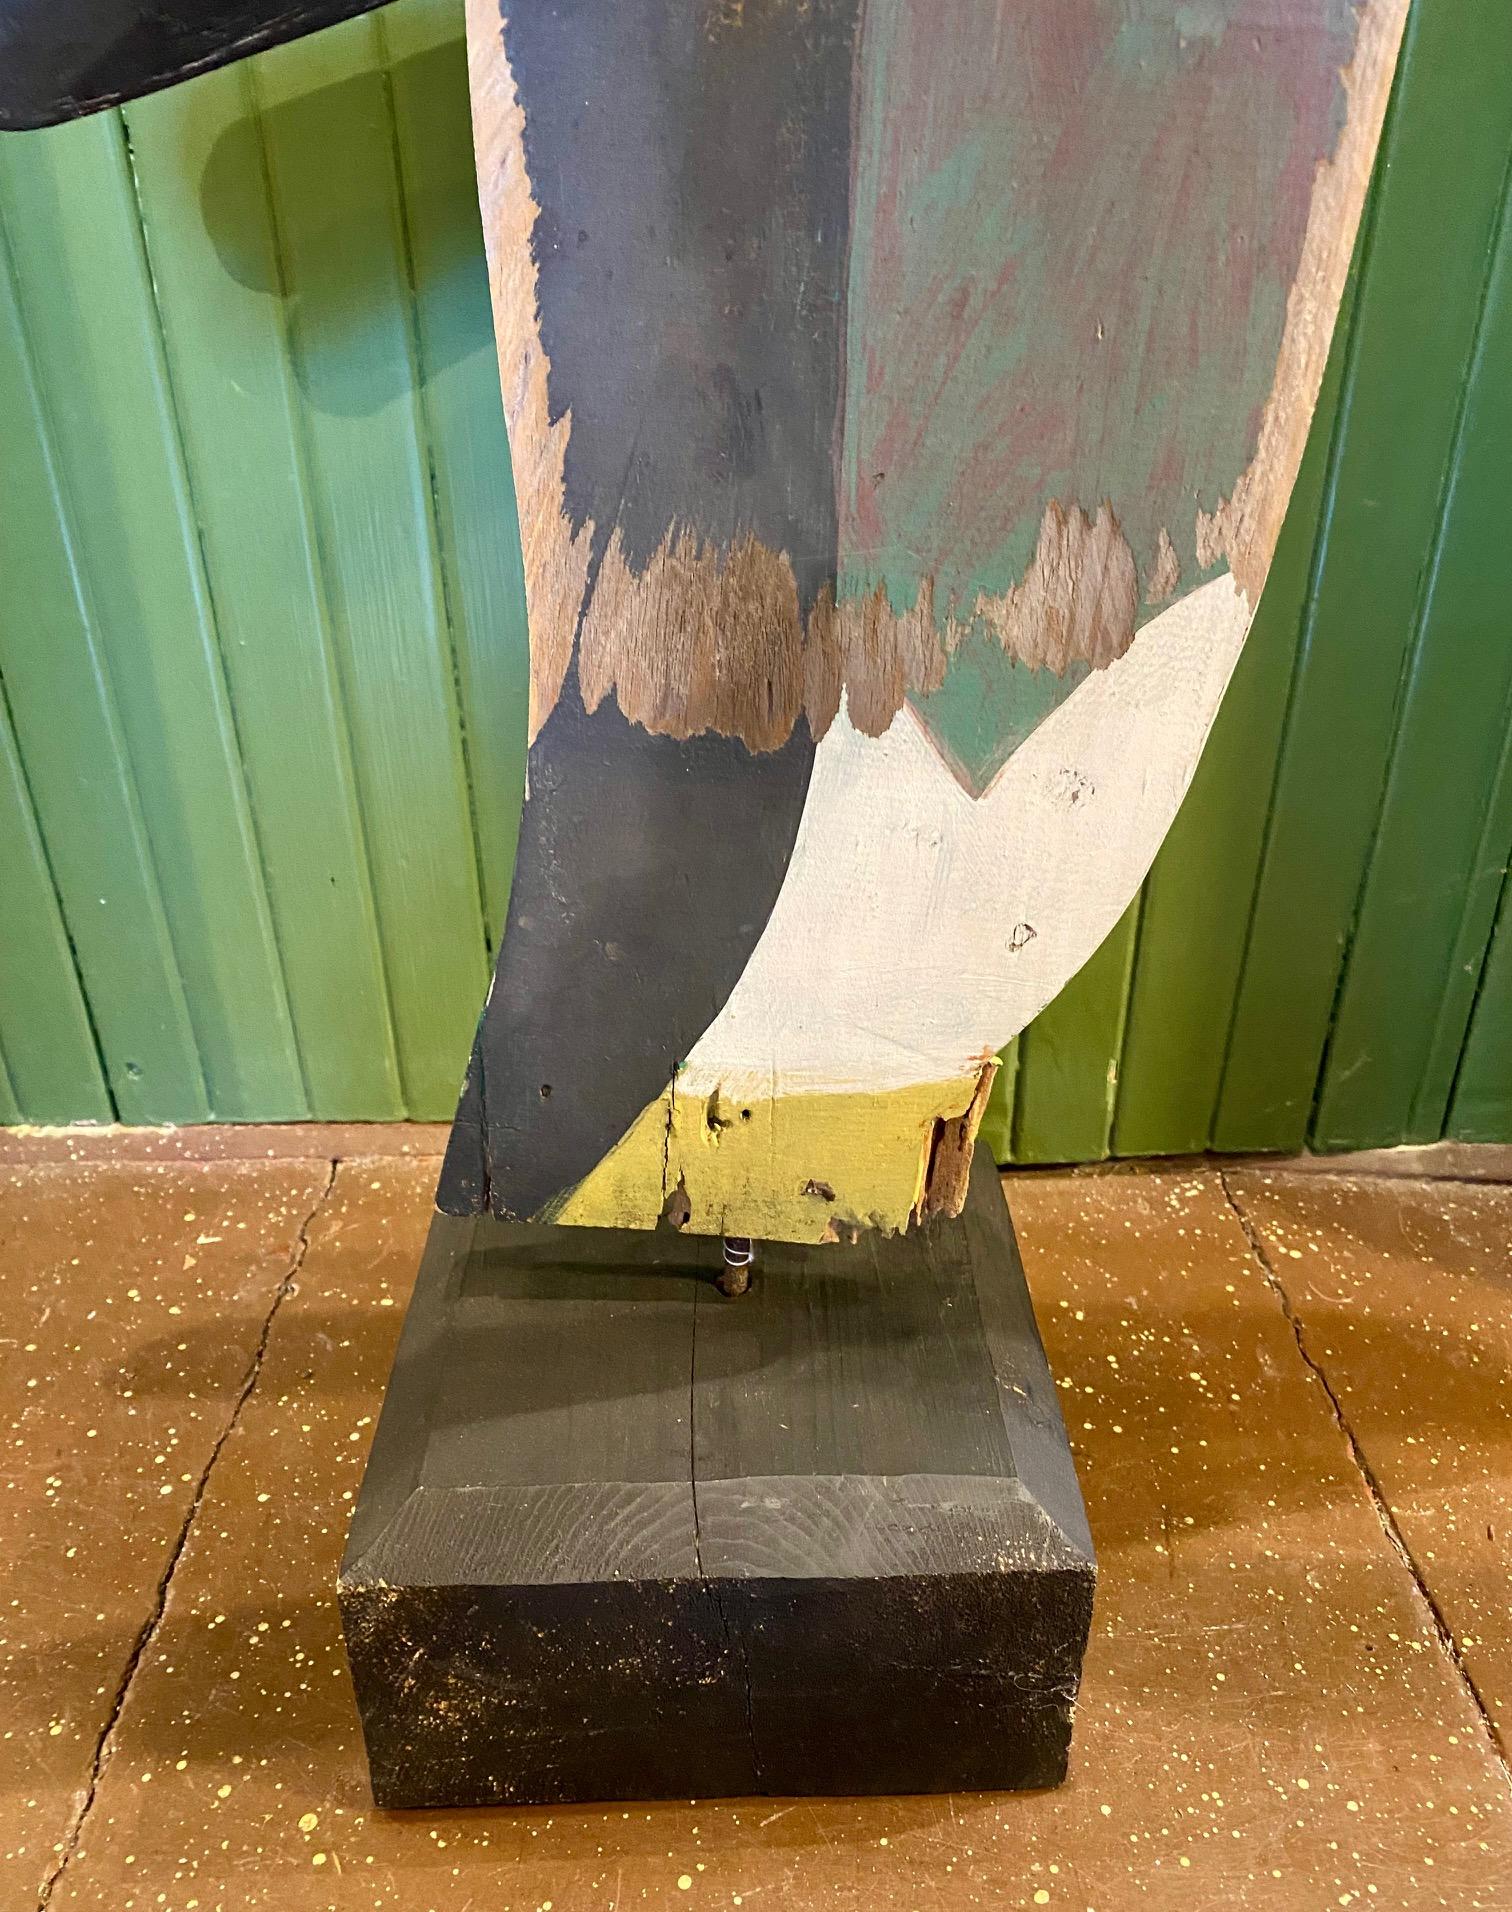 Early Vintage Penguin Whirligig from Plymouth, Massachusetts, circa 1930s - 1940s, a hand cut and painted wooden flat silhouette of a large penguin in worn original paint. The paddles are original as well, and made of un-vulcanized rubber. A unique